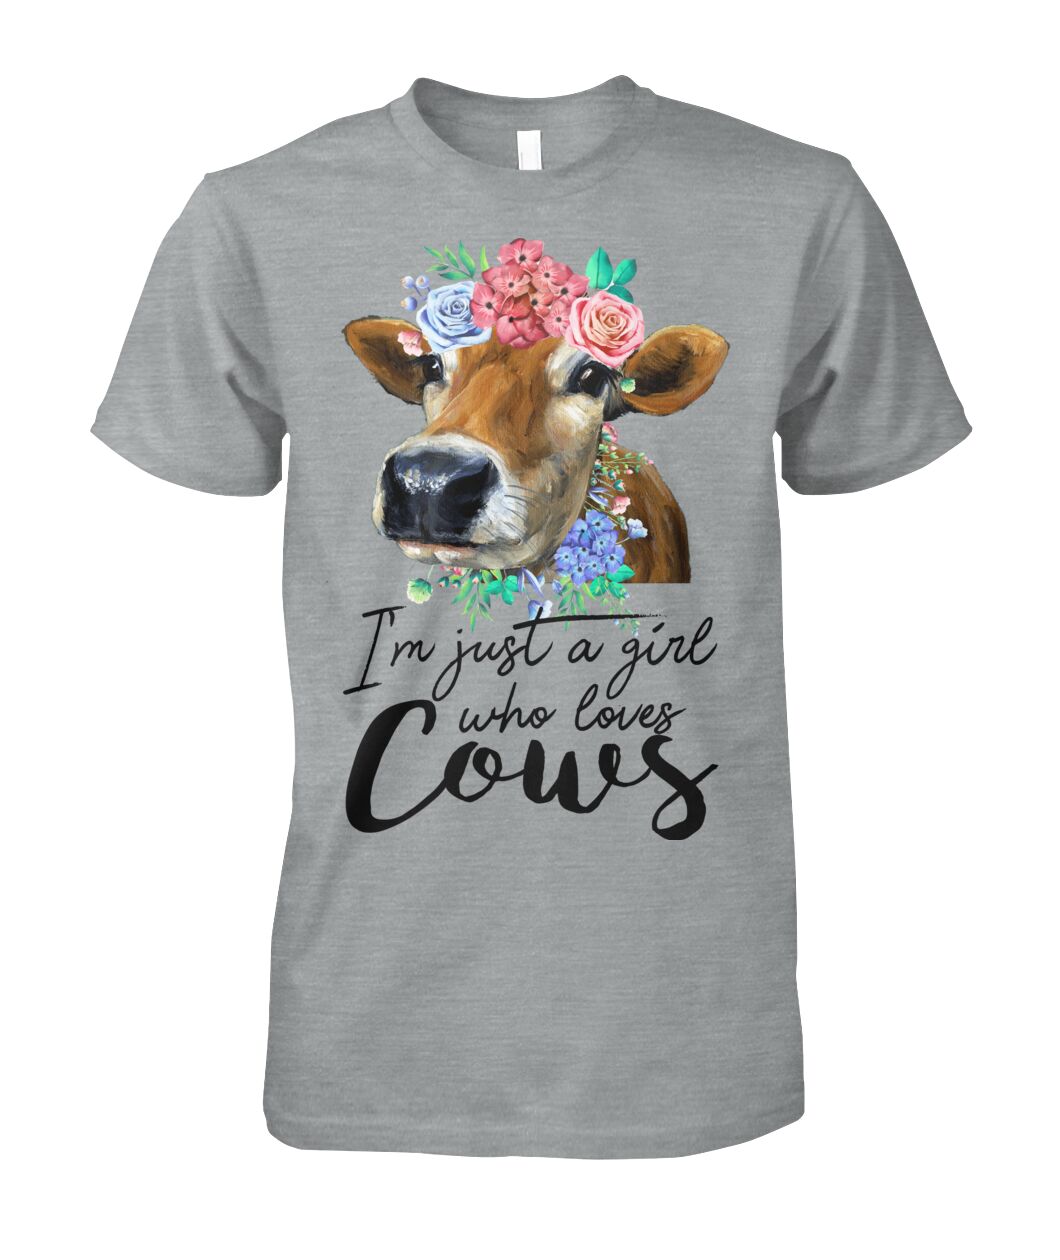 I'm just a girl who loves cows - Men's and Women's t-shirt , Vneck, Hoodies - myfunfarm - clothing acceessories shoes for cow lovers, pig, horse, cat, sheep, dog, chicken, goat farmer